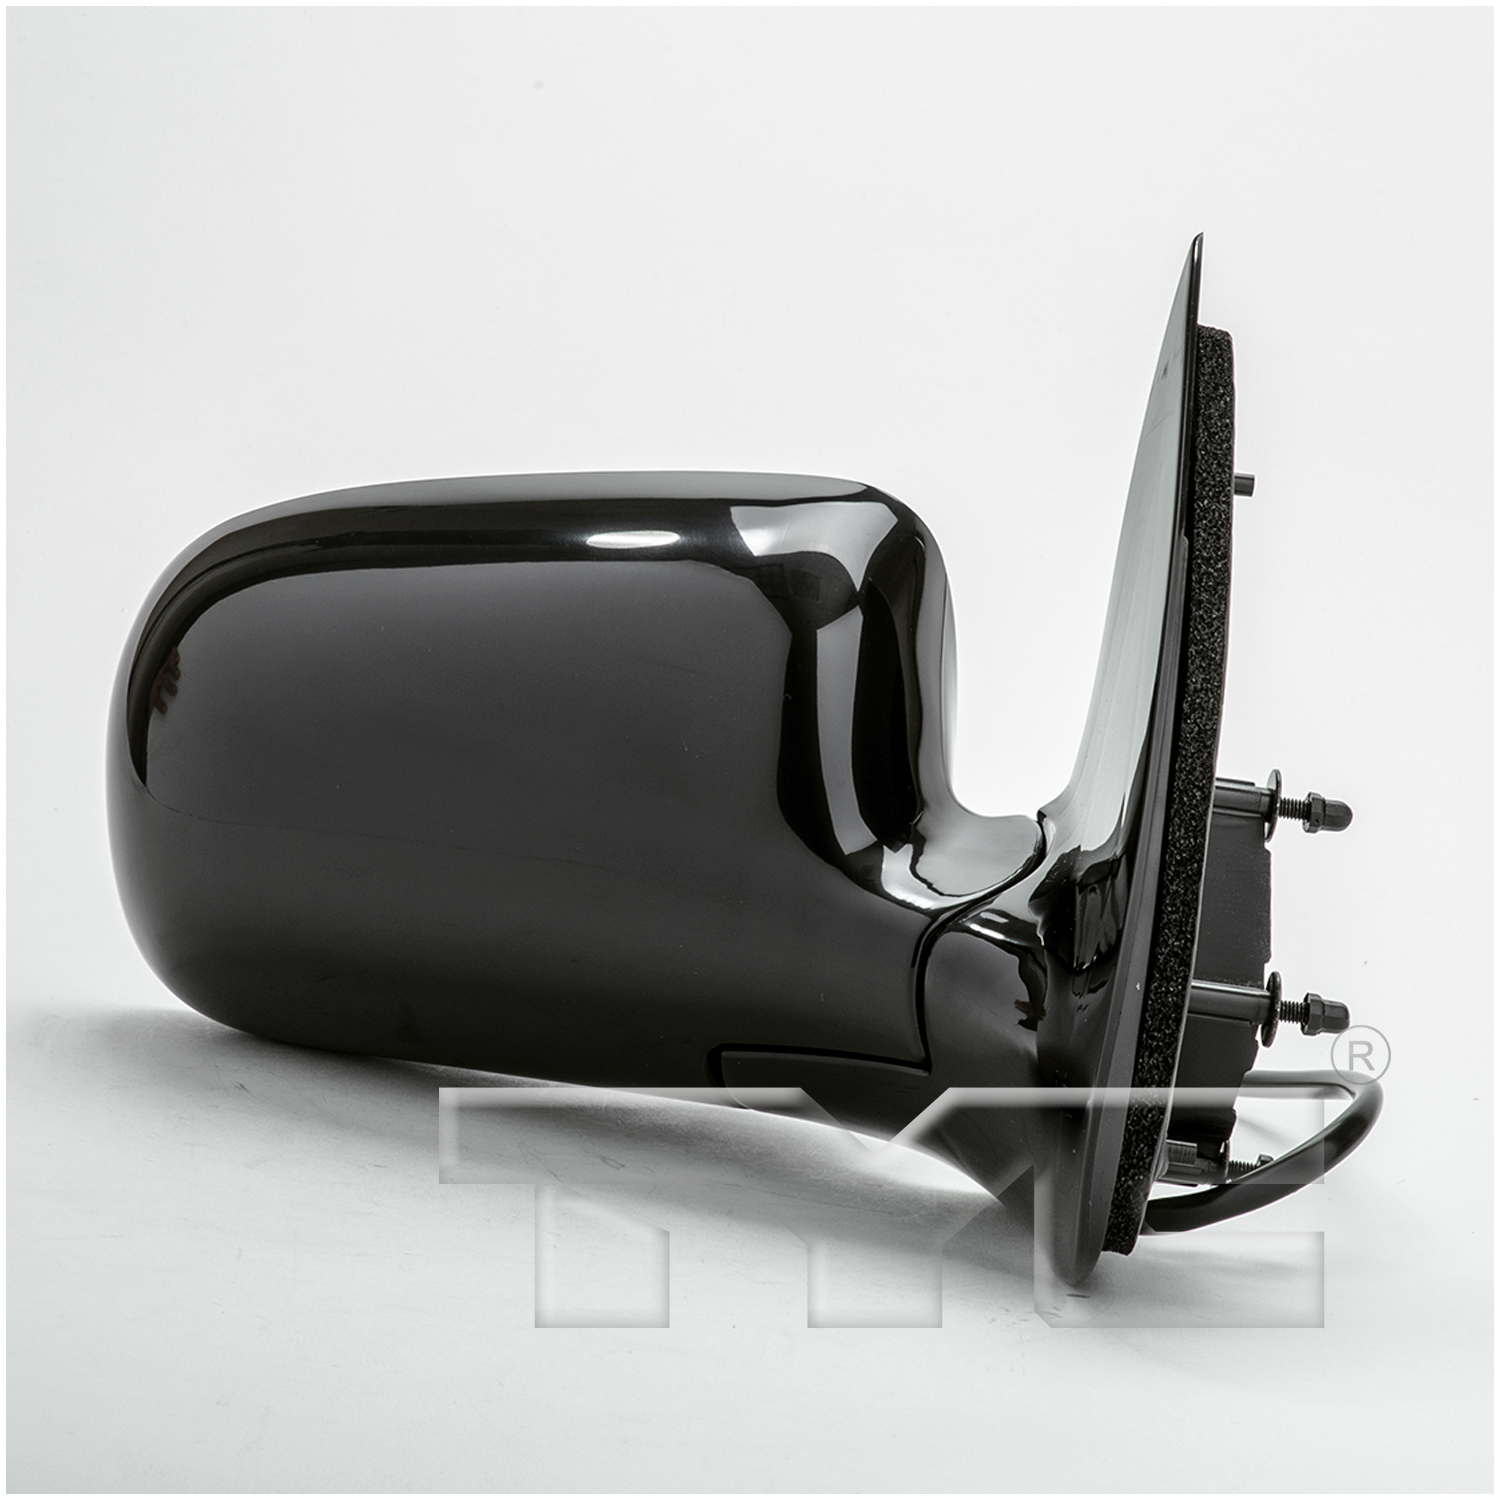 Aftermarket MIRRORS for CHEVROLET - VENTURE, VENTURE,99-05,RT Mirror outside rear view